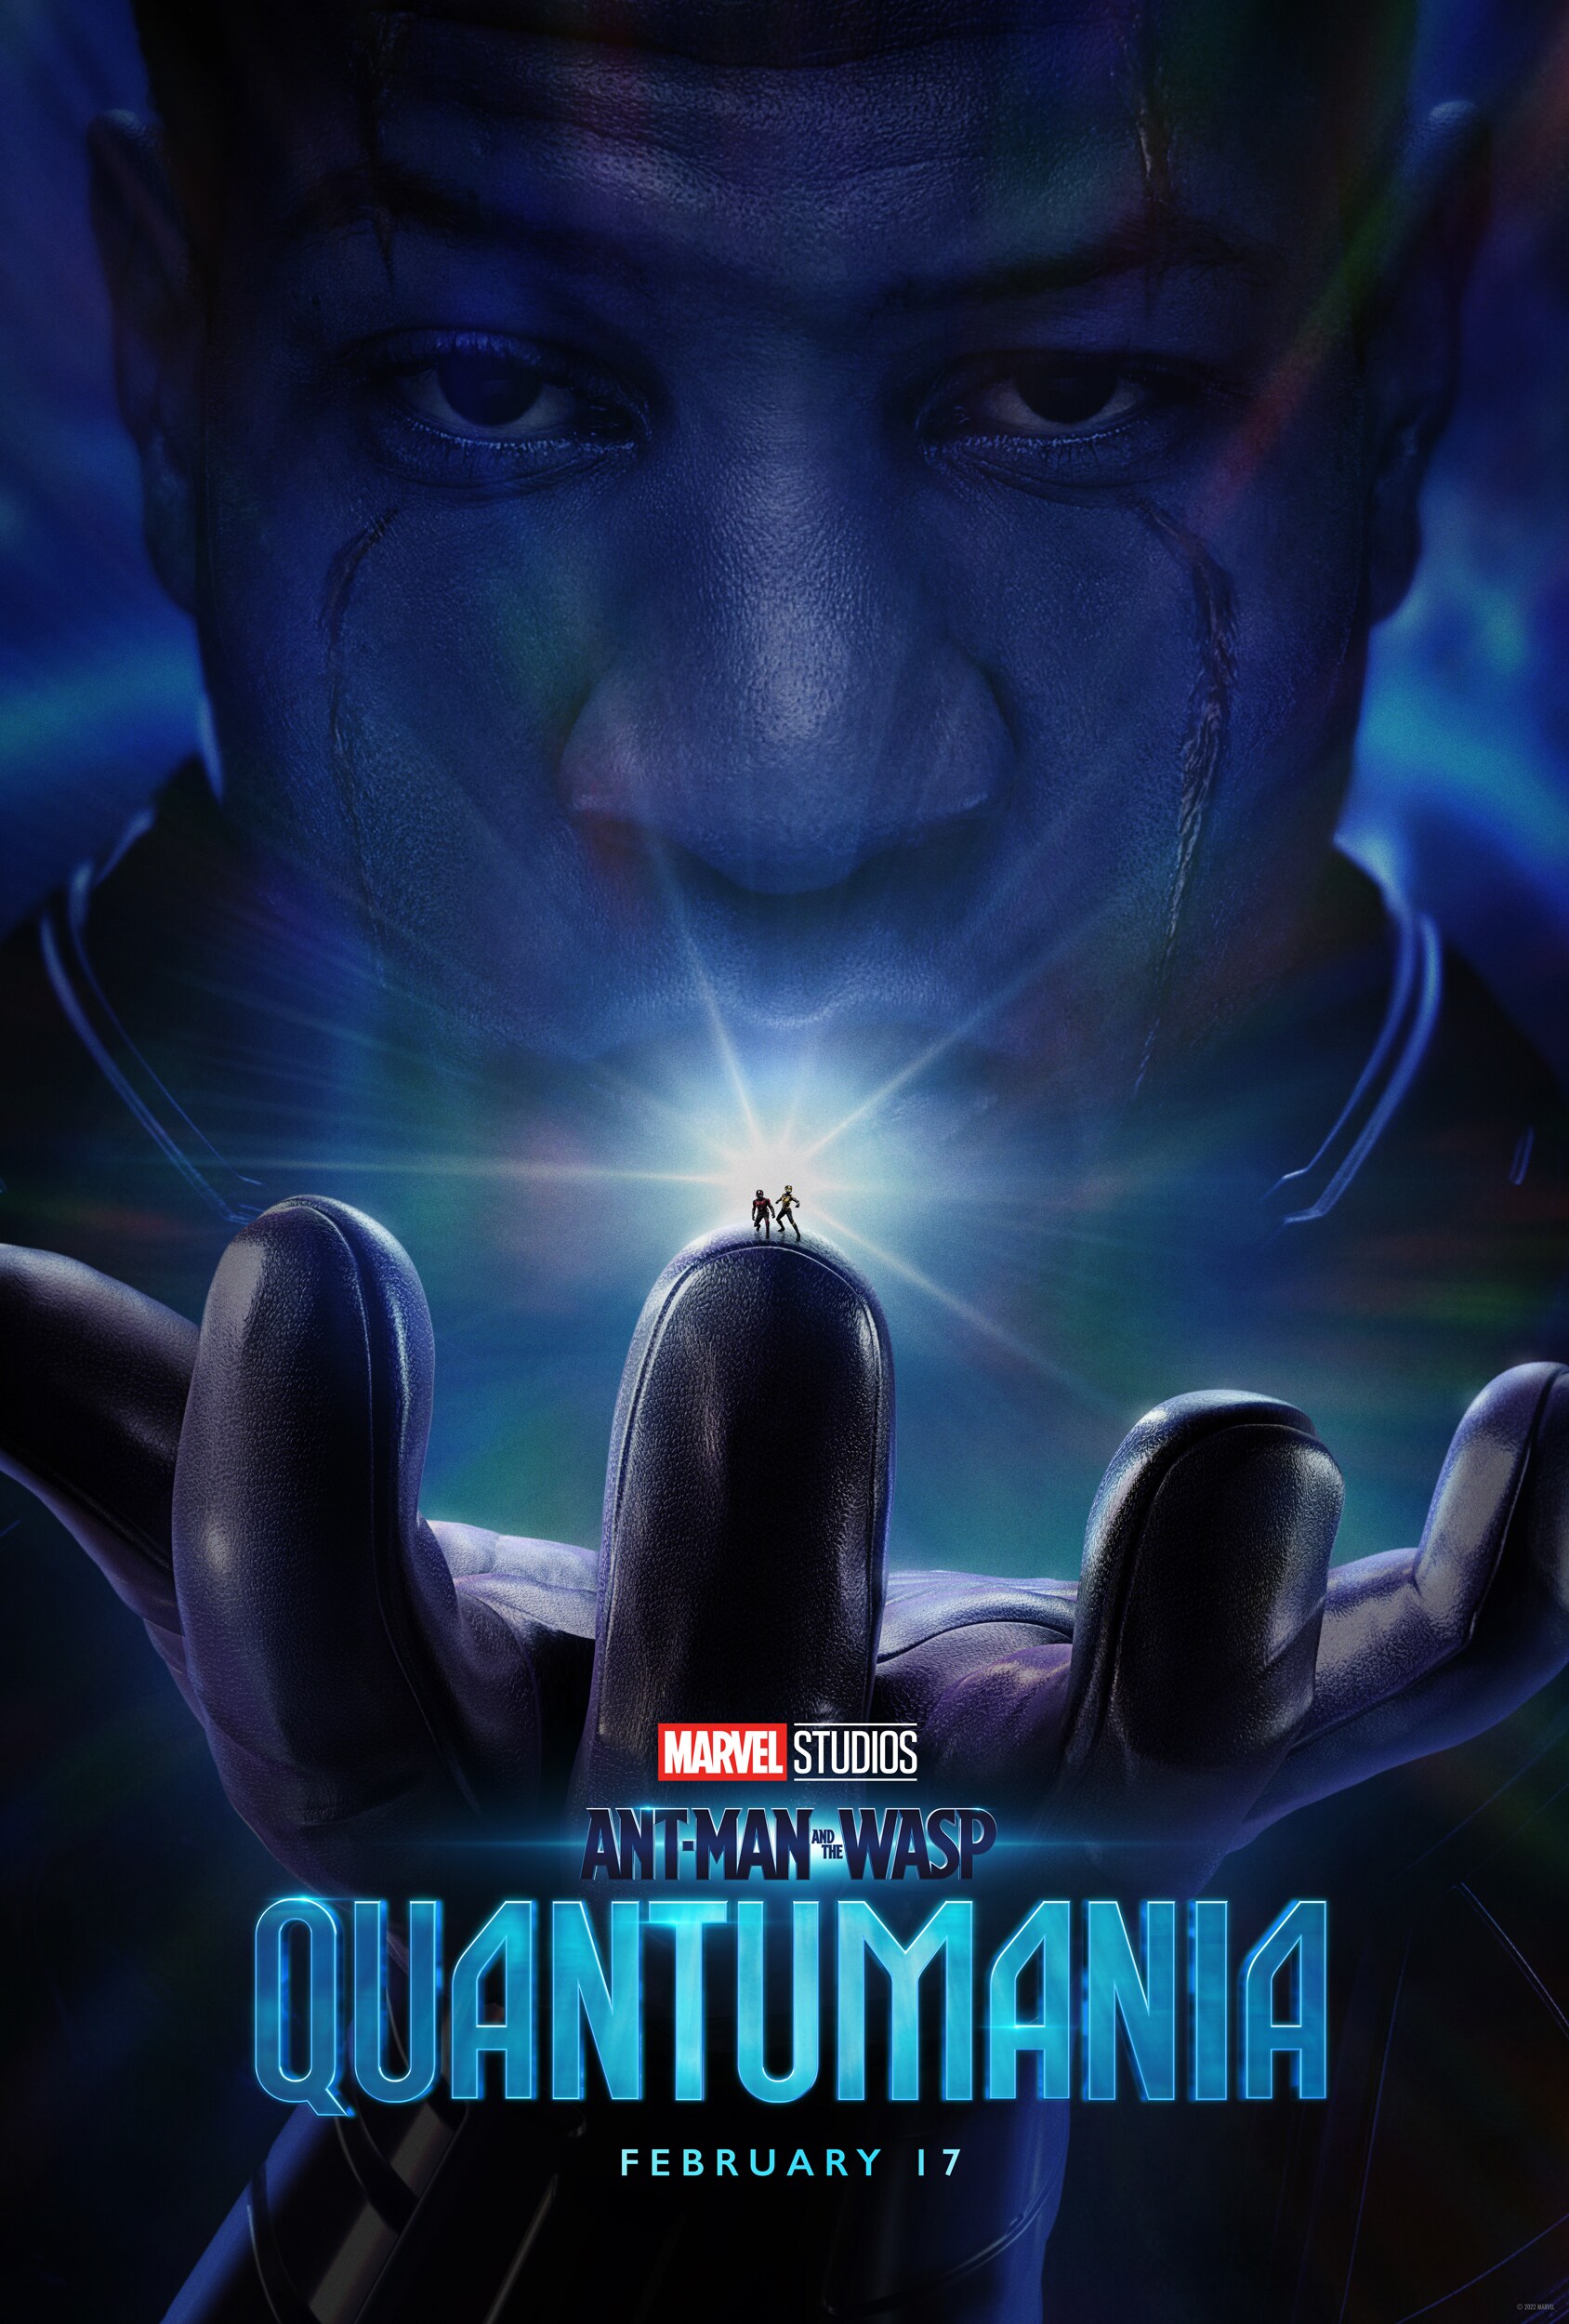 Ant-Man and the Wasp: Quantumania poster.